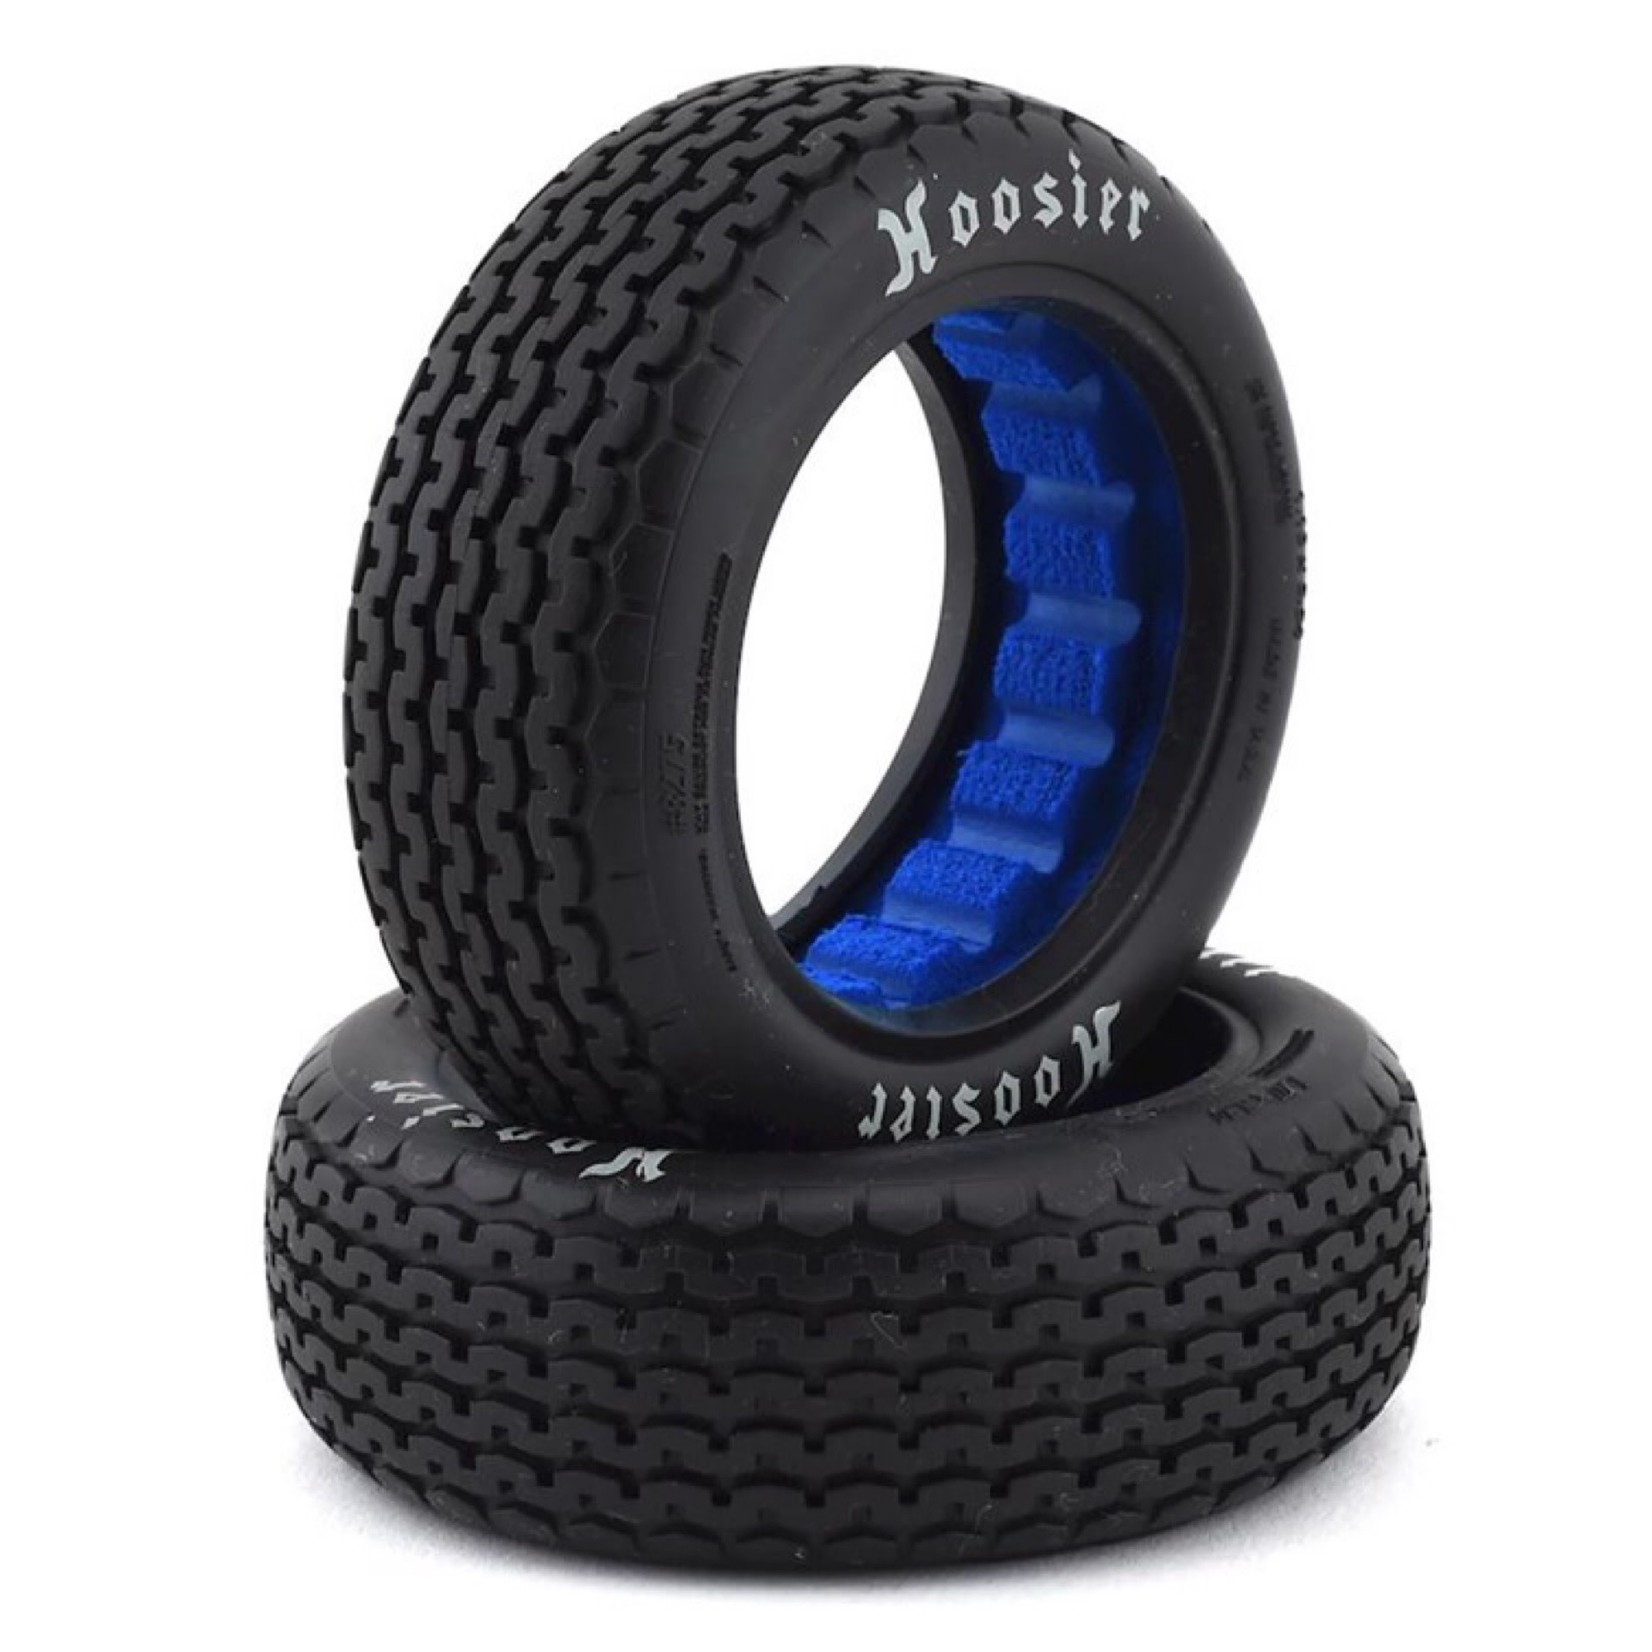 Pro-Line Pro-Line Hoosier Super Chain Link Dirt Oval 2.2" 2WD Front Buggy Tires (2) (M3) #8275-02